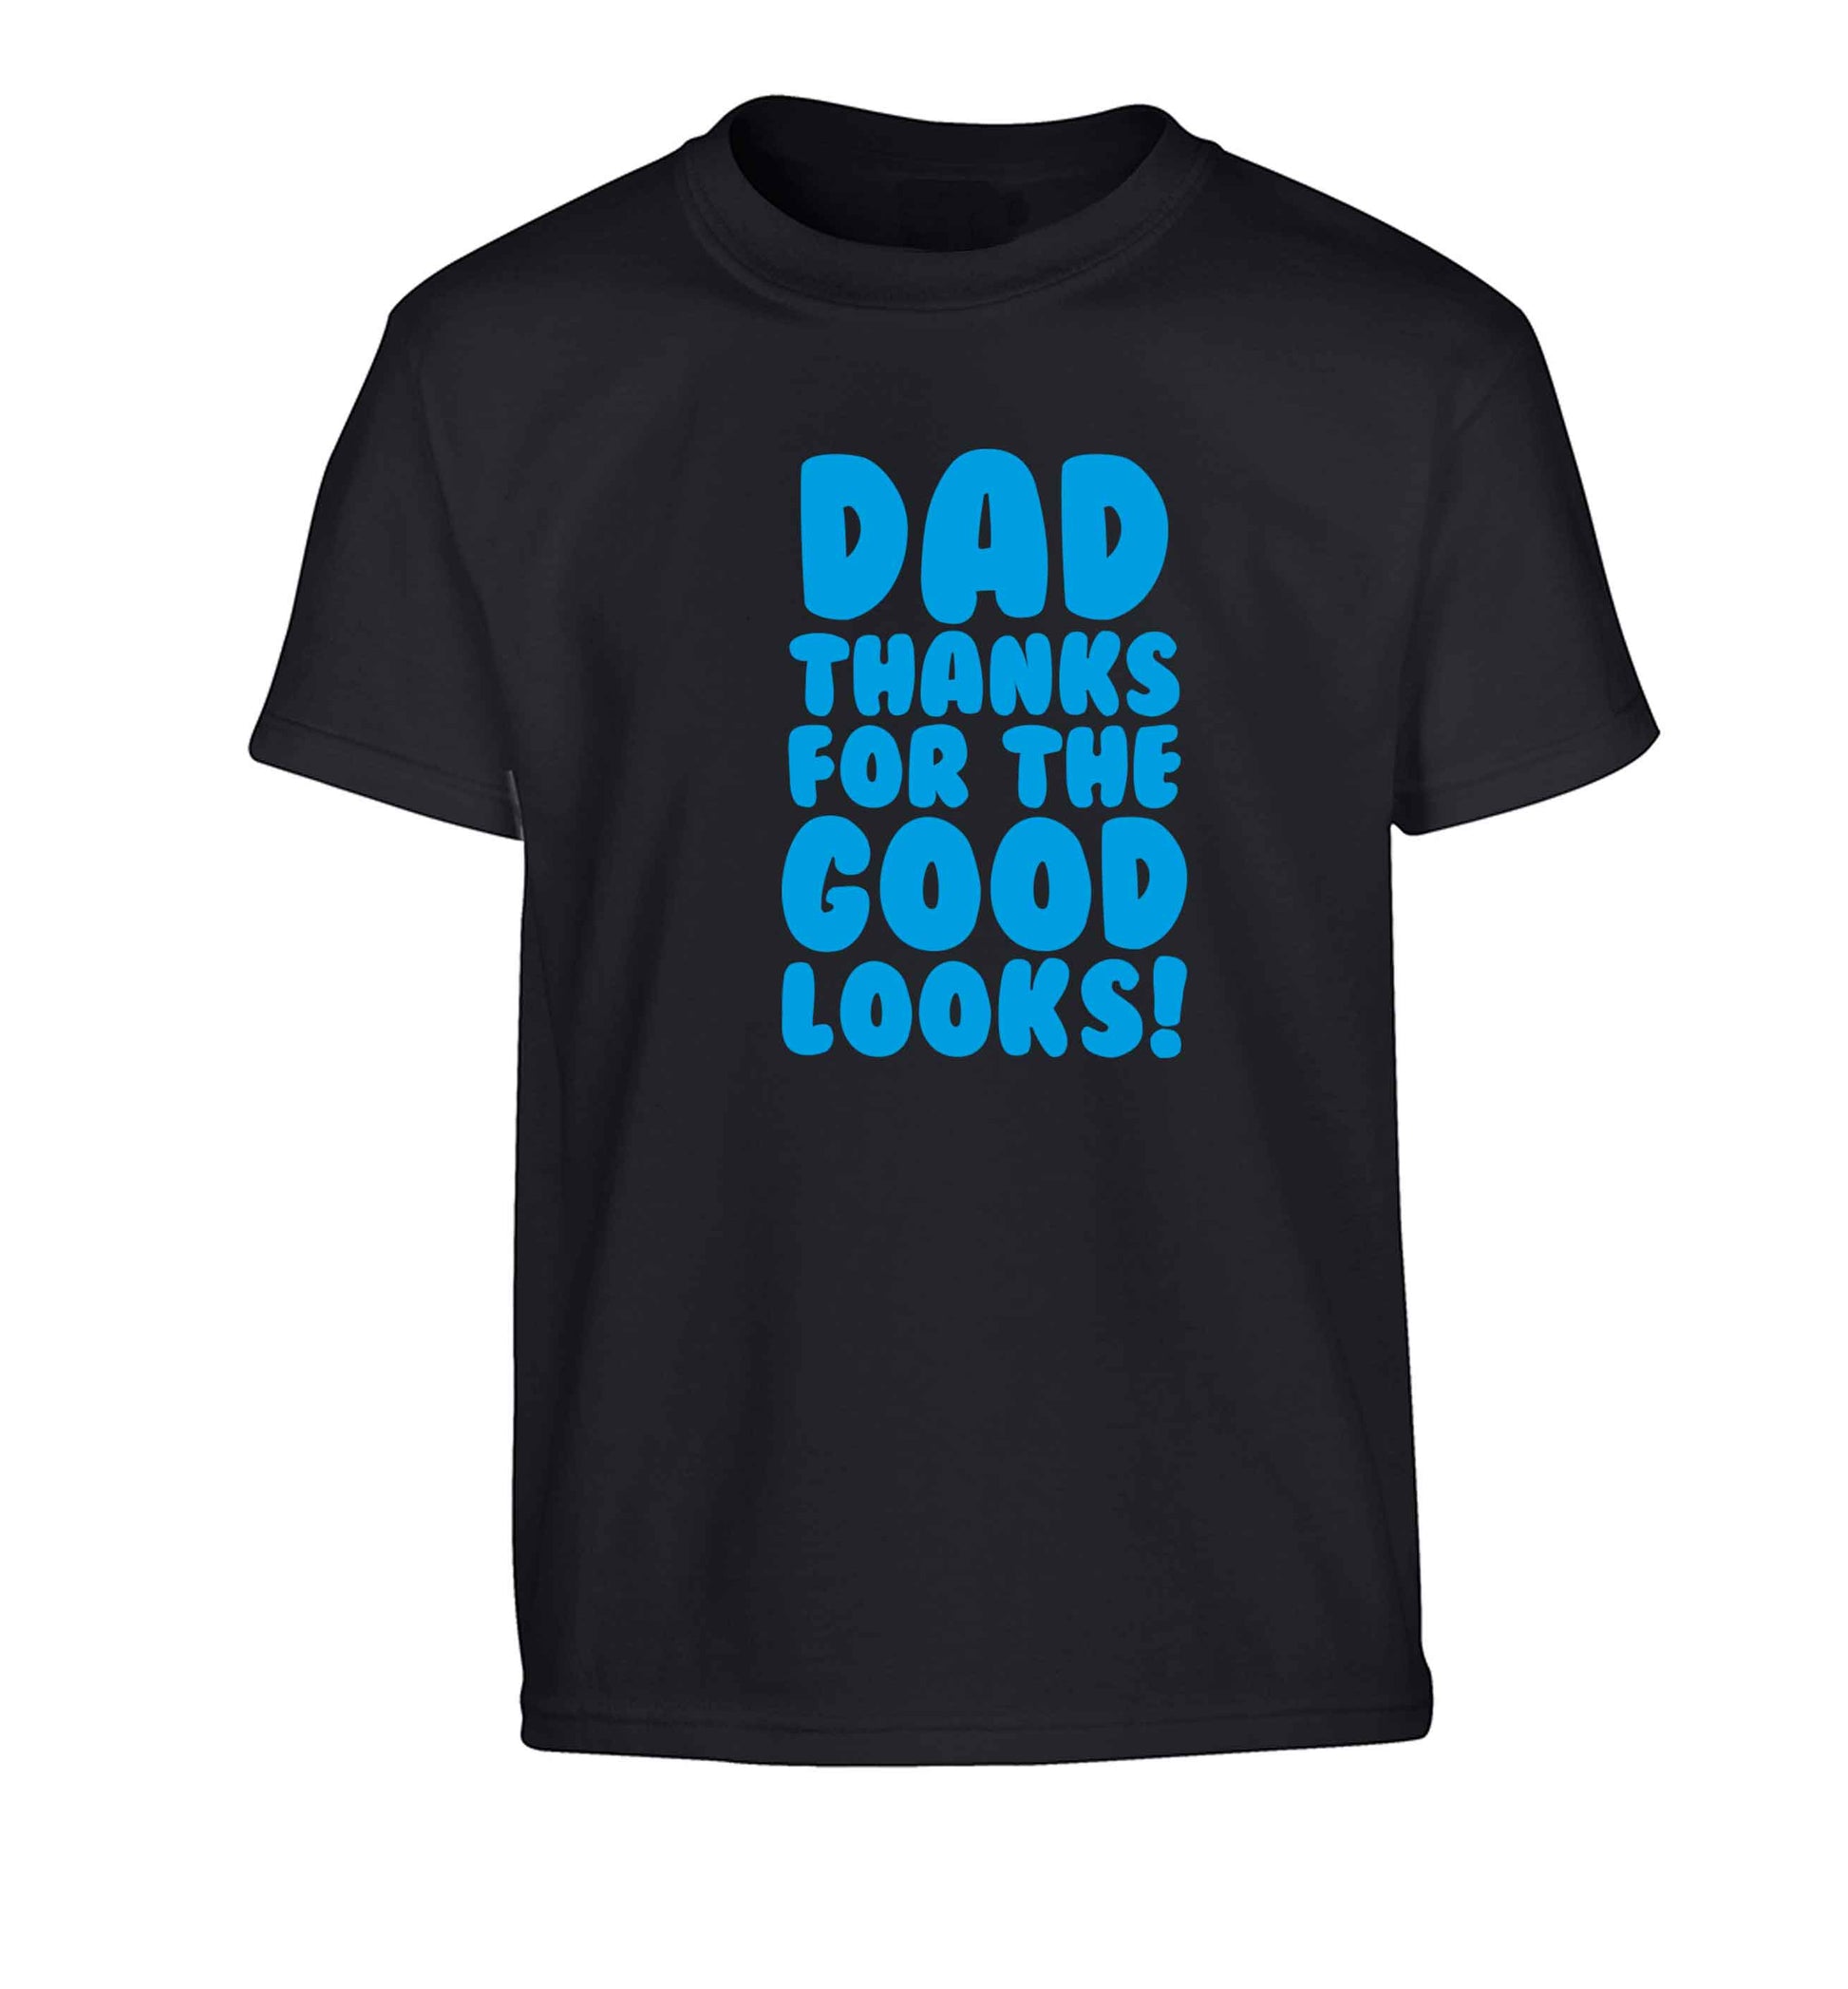 Dad thanks for the good looks Children's black Tshirt 12-13 Years